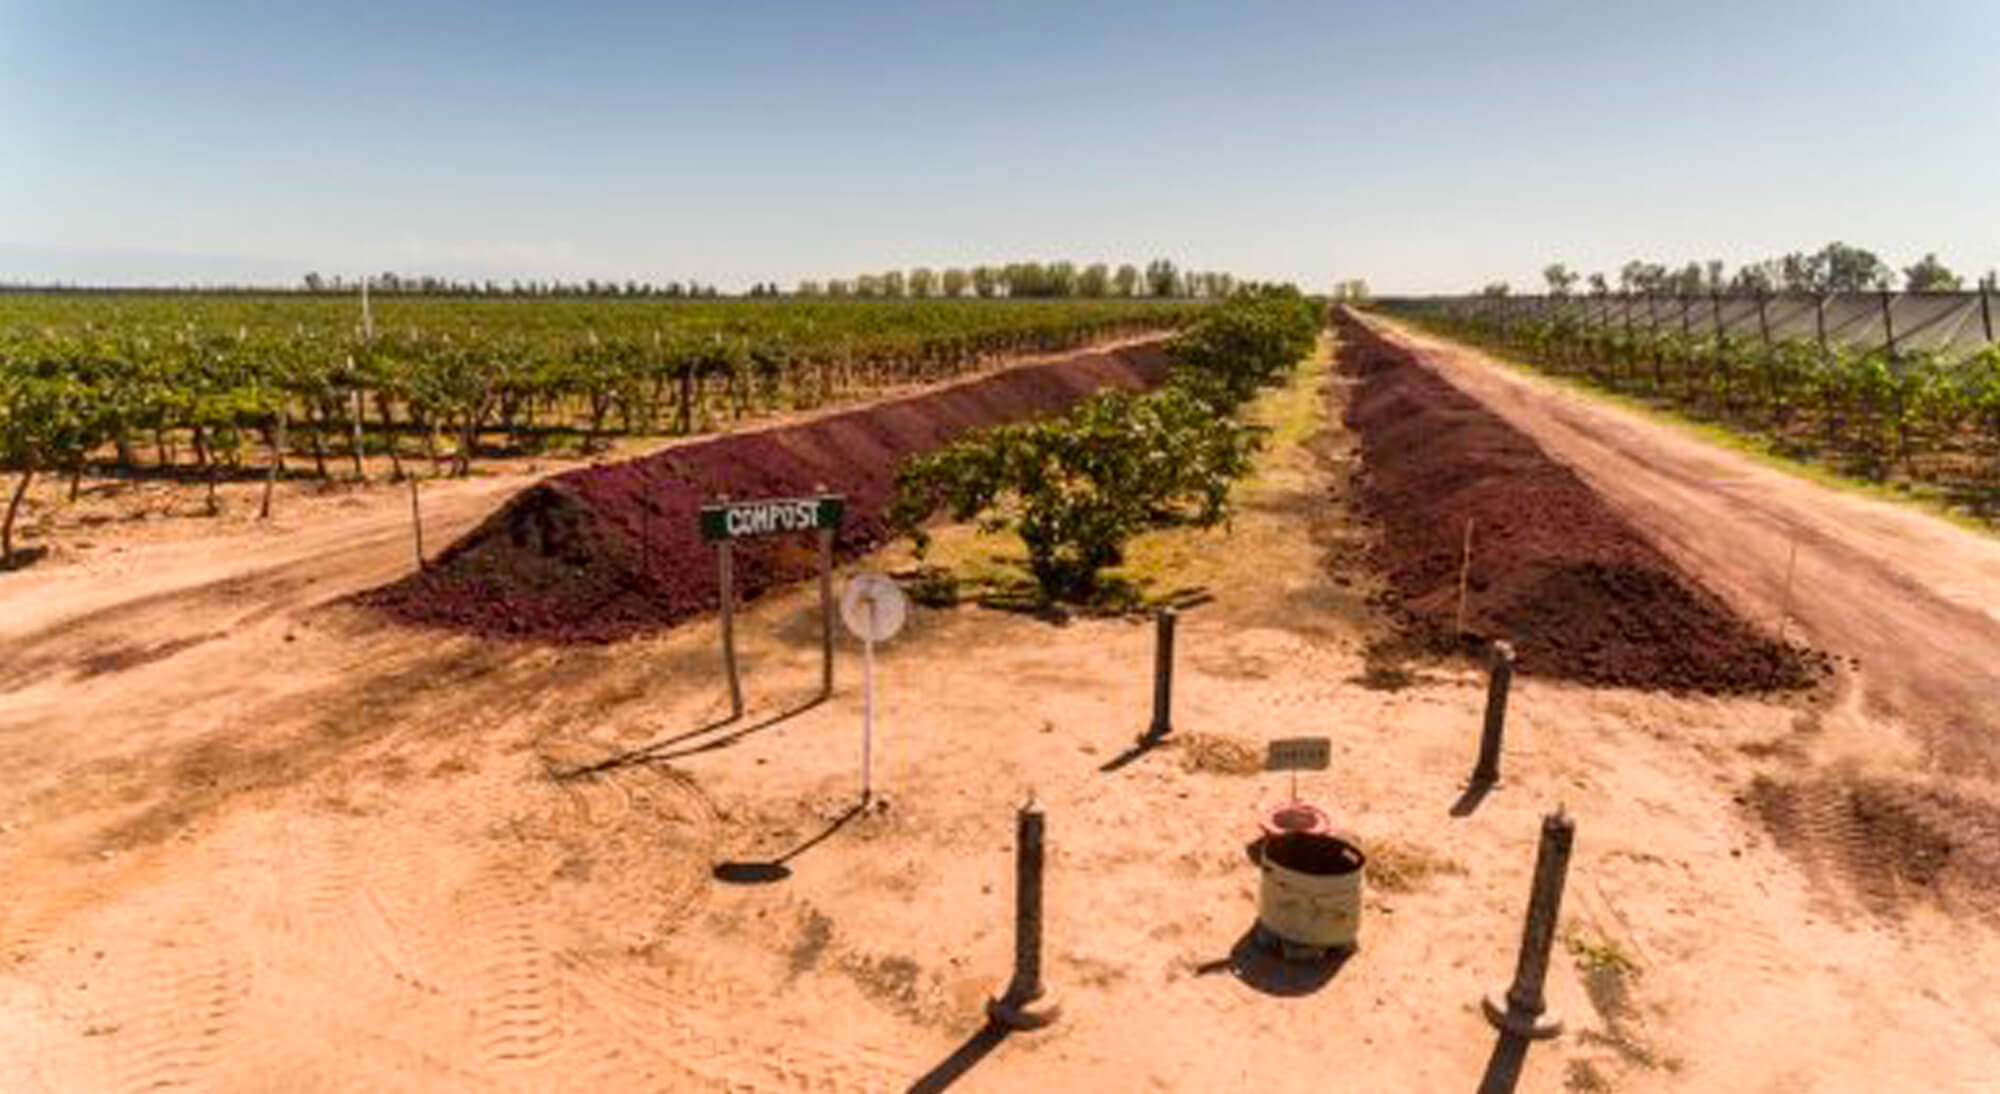 Wineries in Mendoza choose sustainability